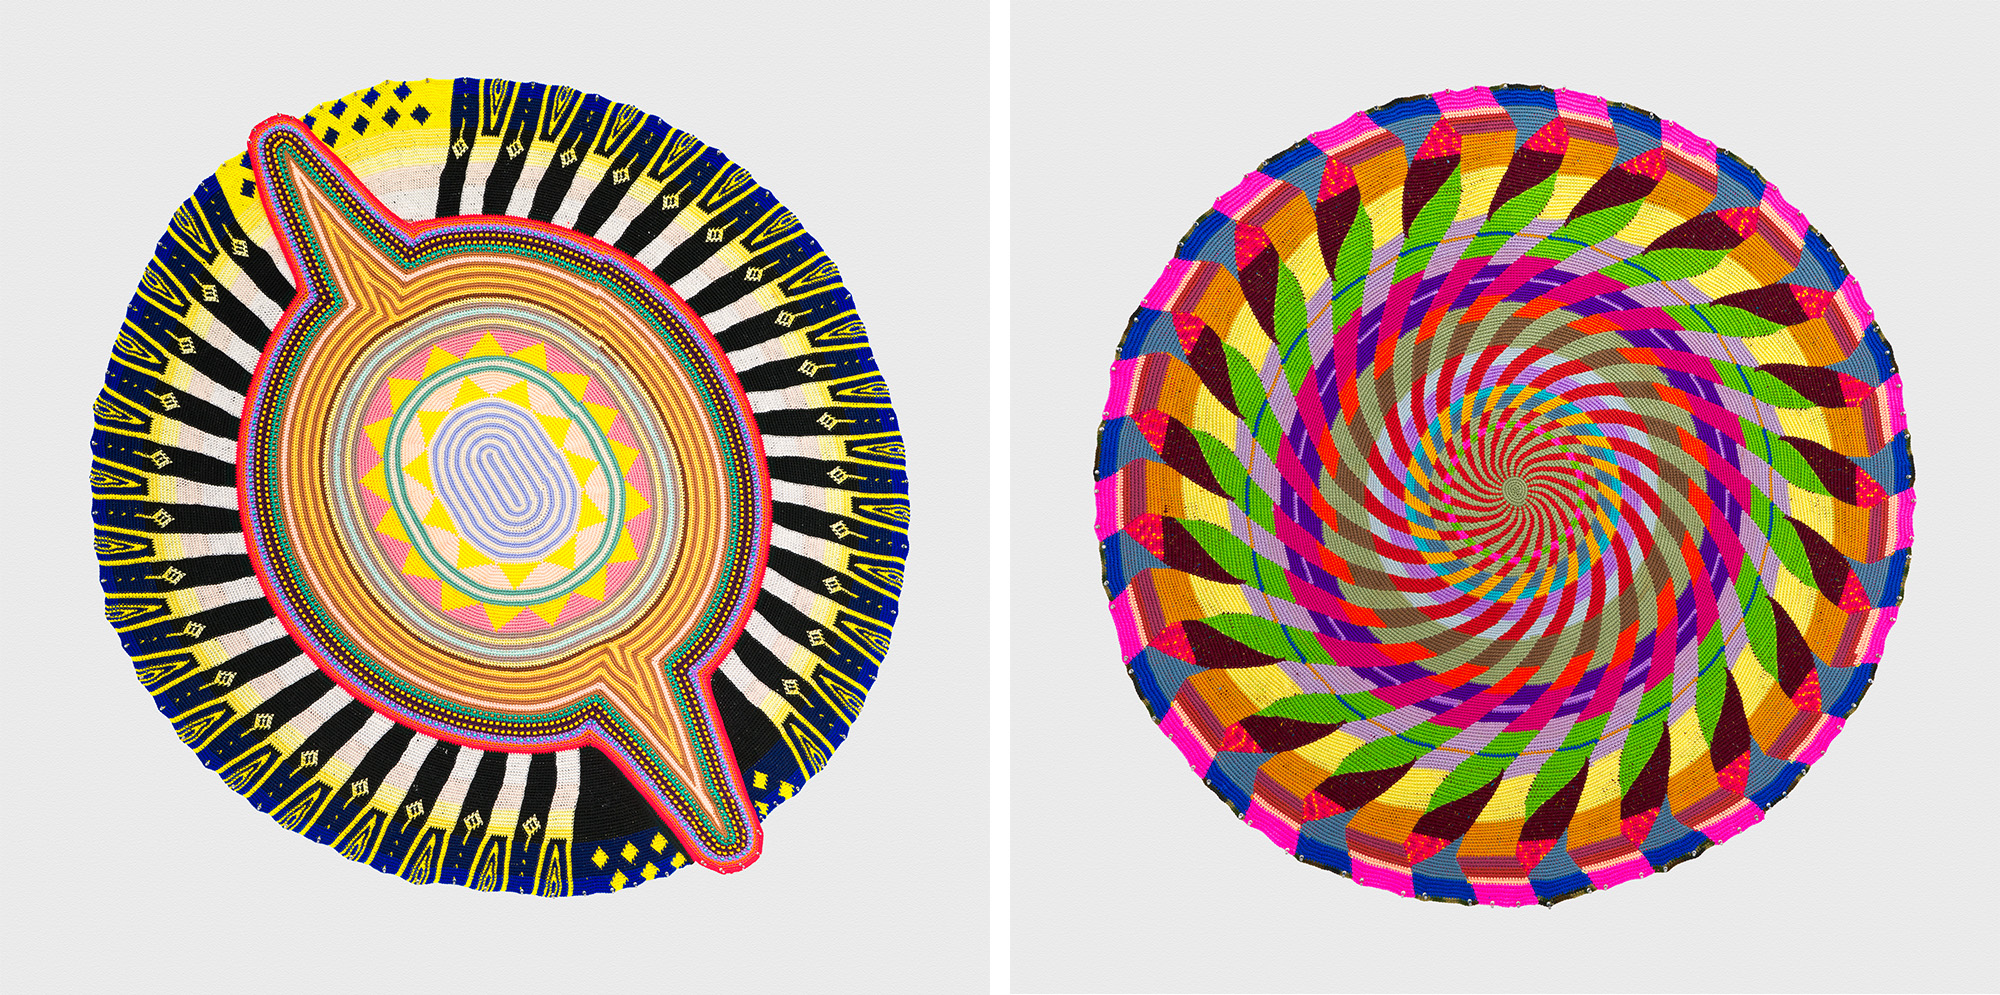 two side-by-side images of brightly colored, mandala-like, crocheted wall works